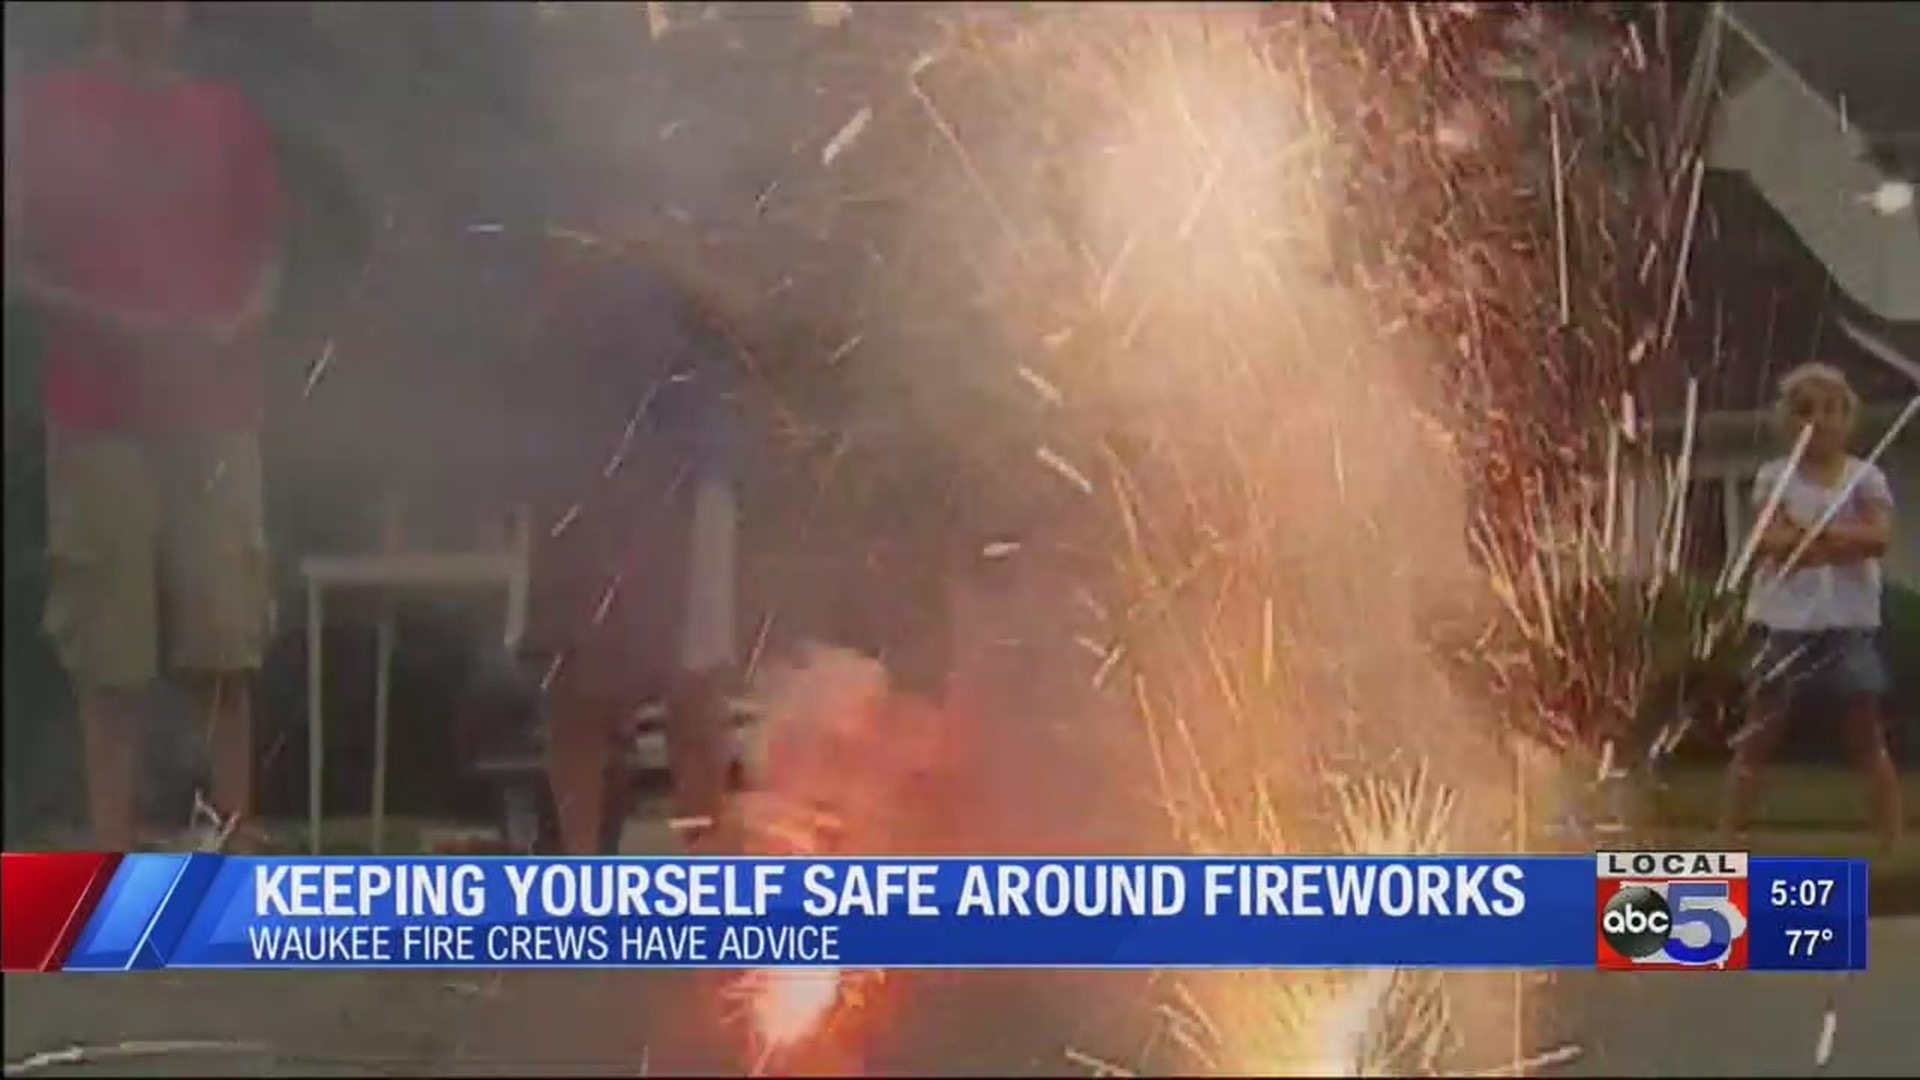 Fireworks safety advice from Waukee Fire